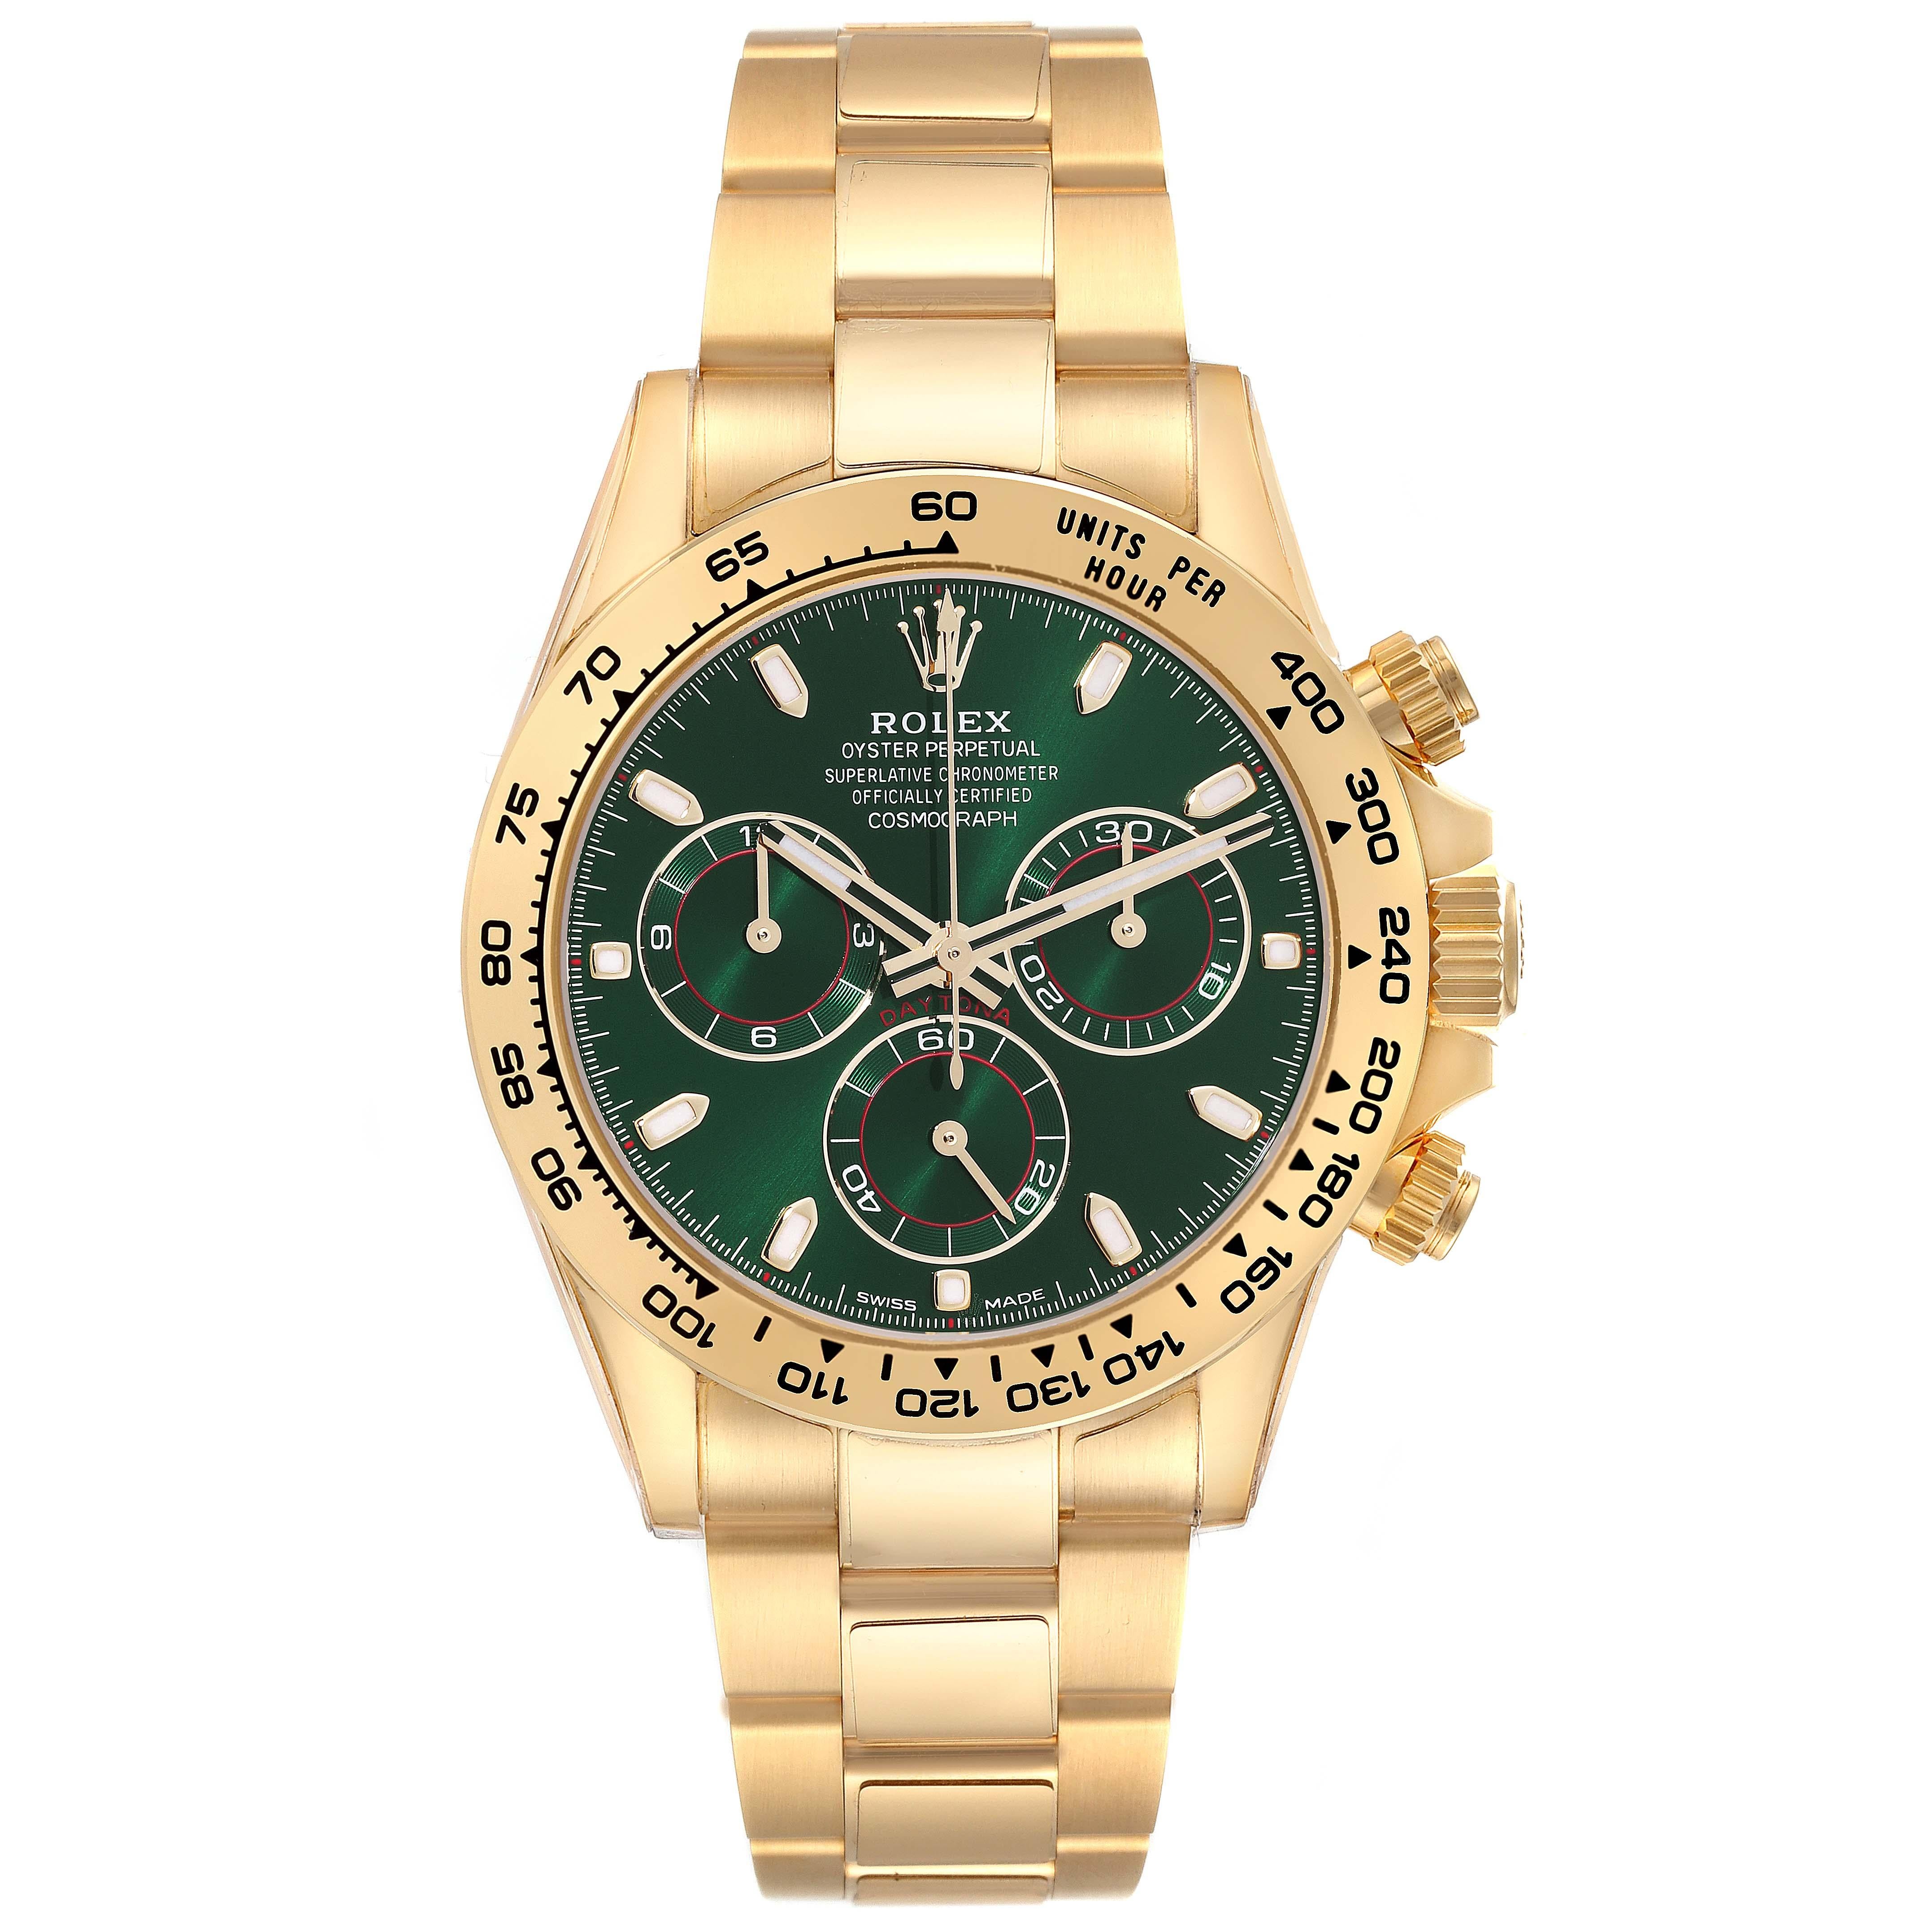 Rolex Daytona Yellow Gold Green Dial Mens Watch 116508 Unworn. Officially certified chronometer self-winding movement. Rhodium-plated, 44 jewels, straight line lever escapement, monometallic balance adjusted to temperatures and 5 positions, shock